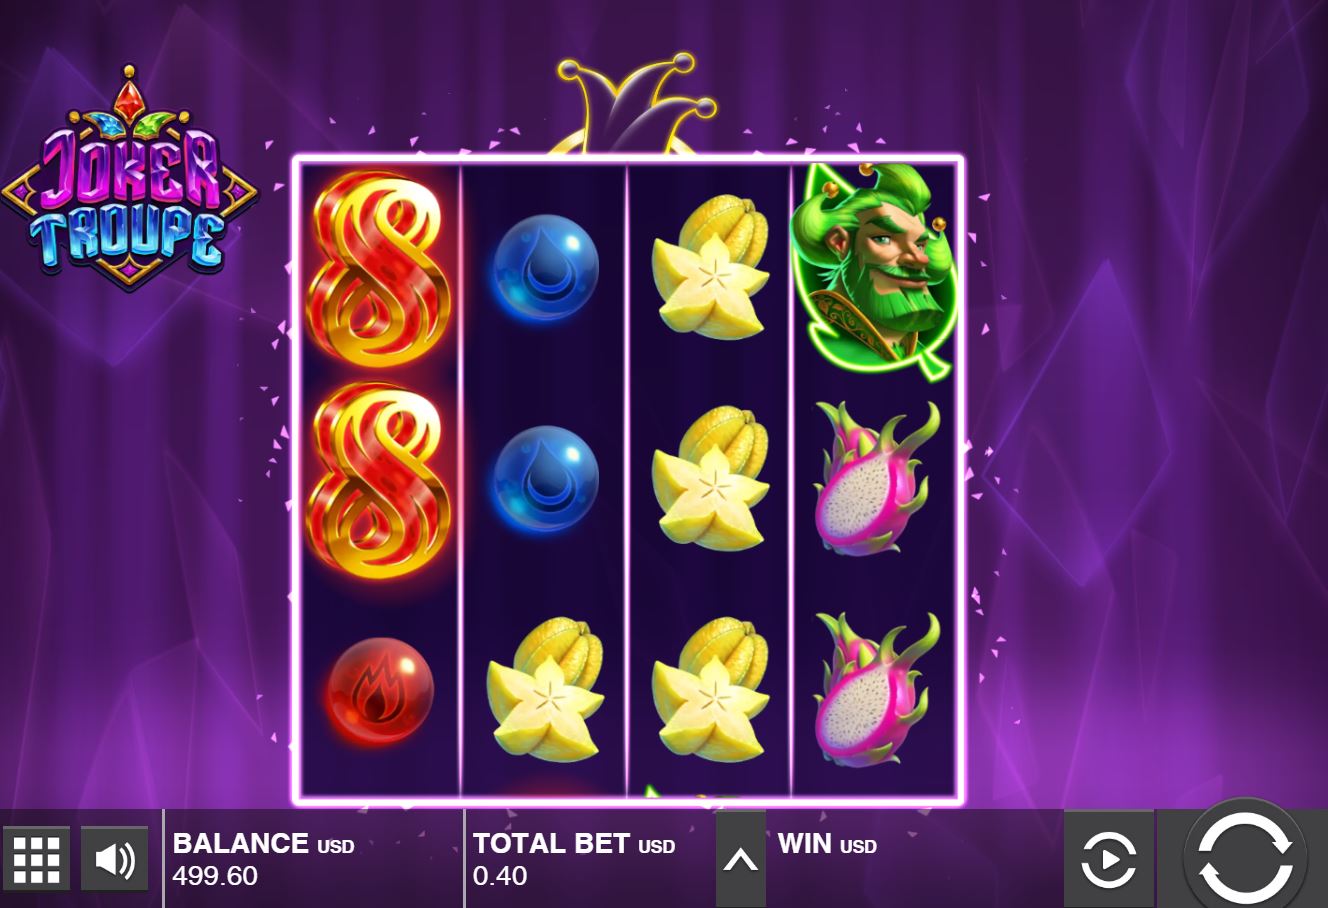 Joker Troupe slot by Push Gaming free play demo and review